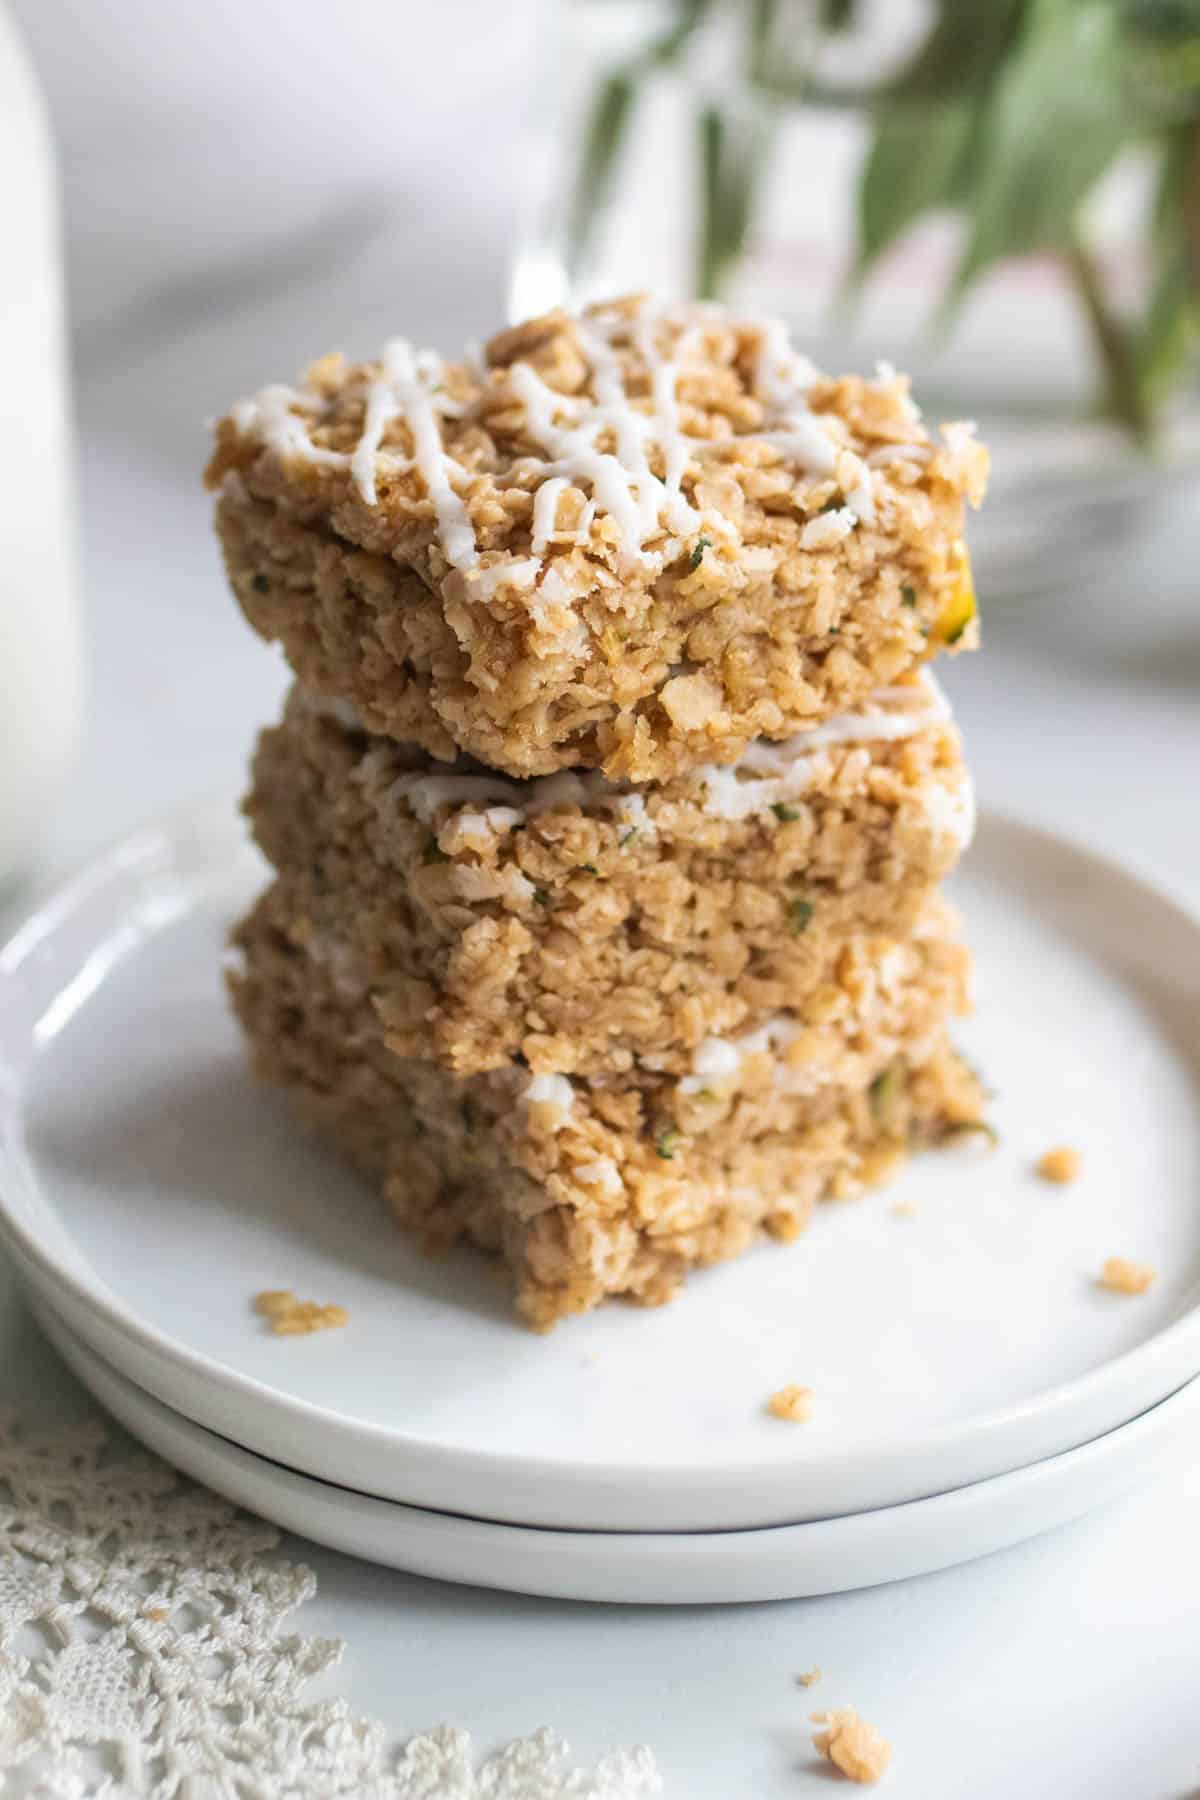 A plate with 3 zucchini bars with oats scattered around the edges.